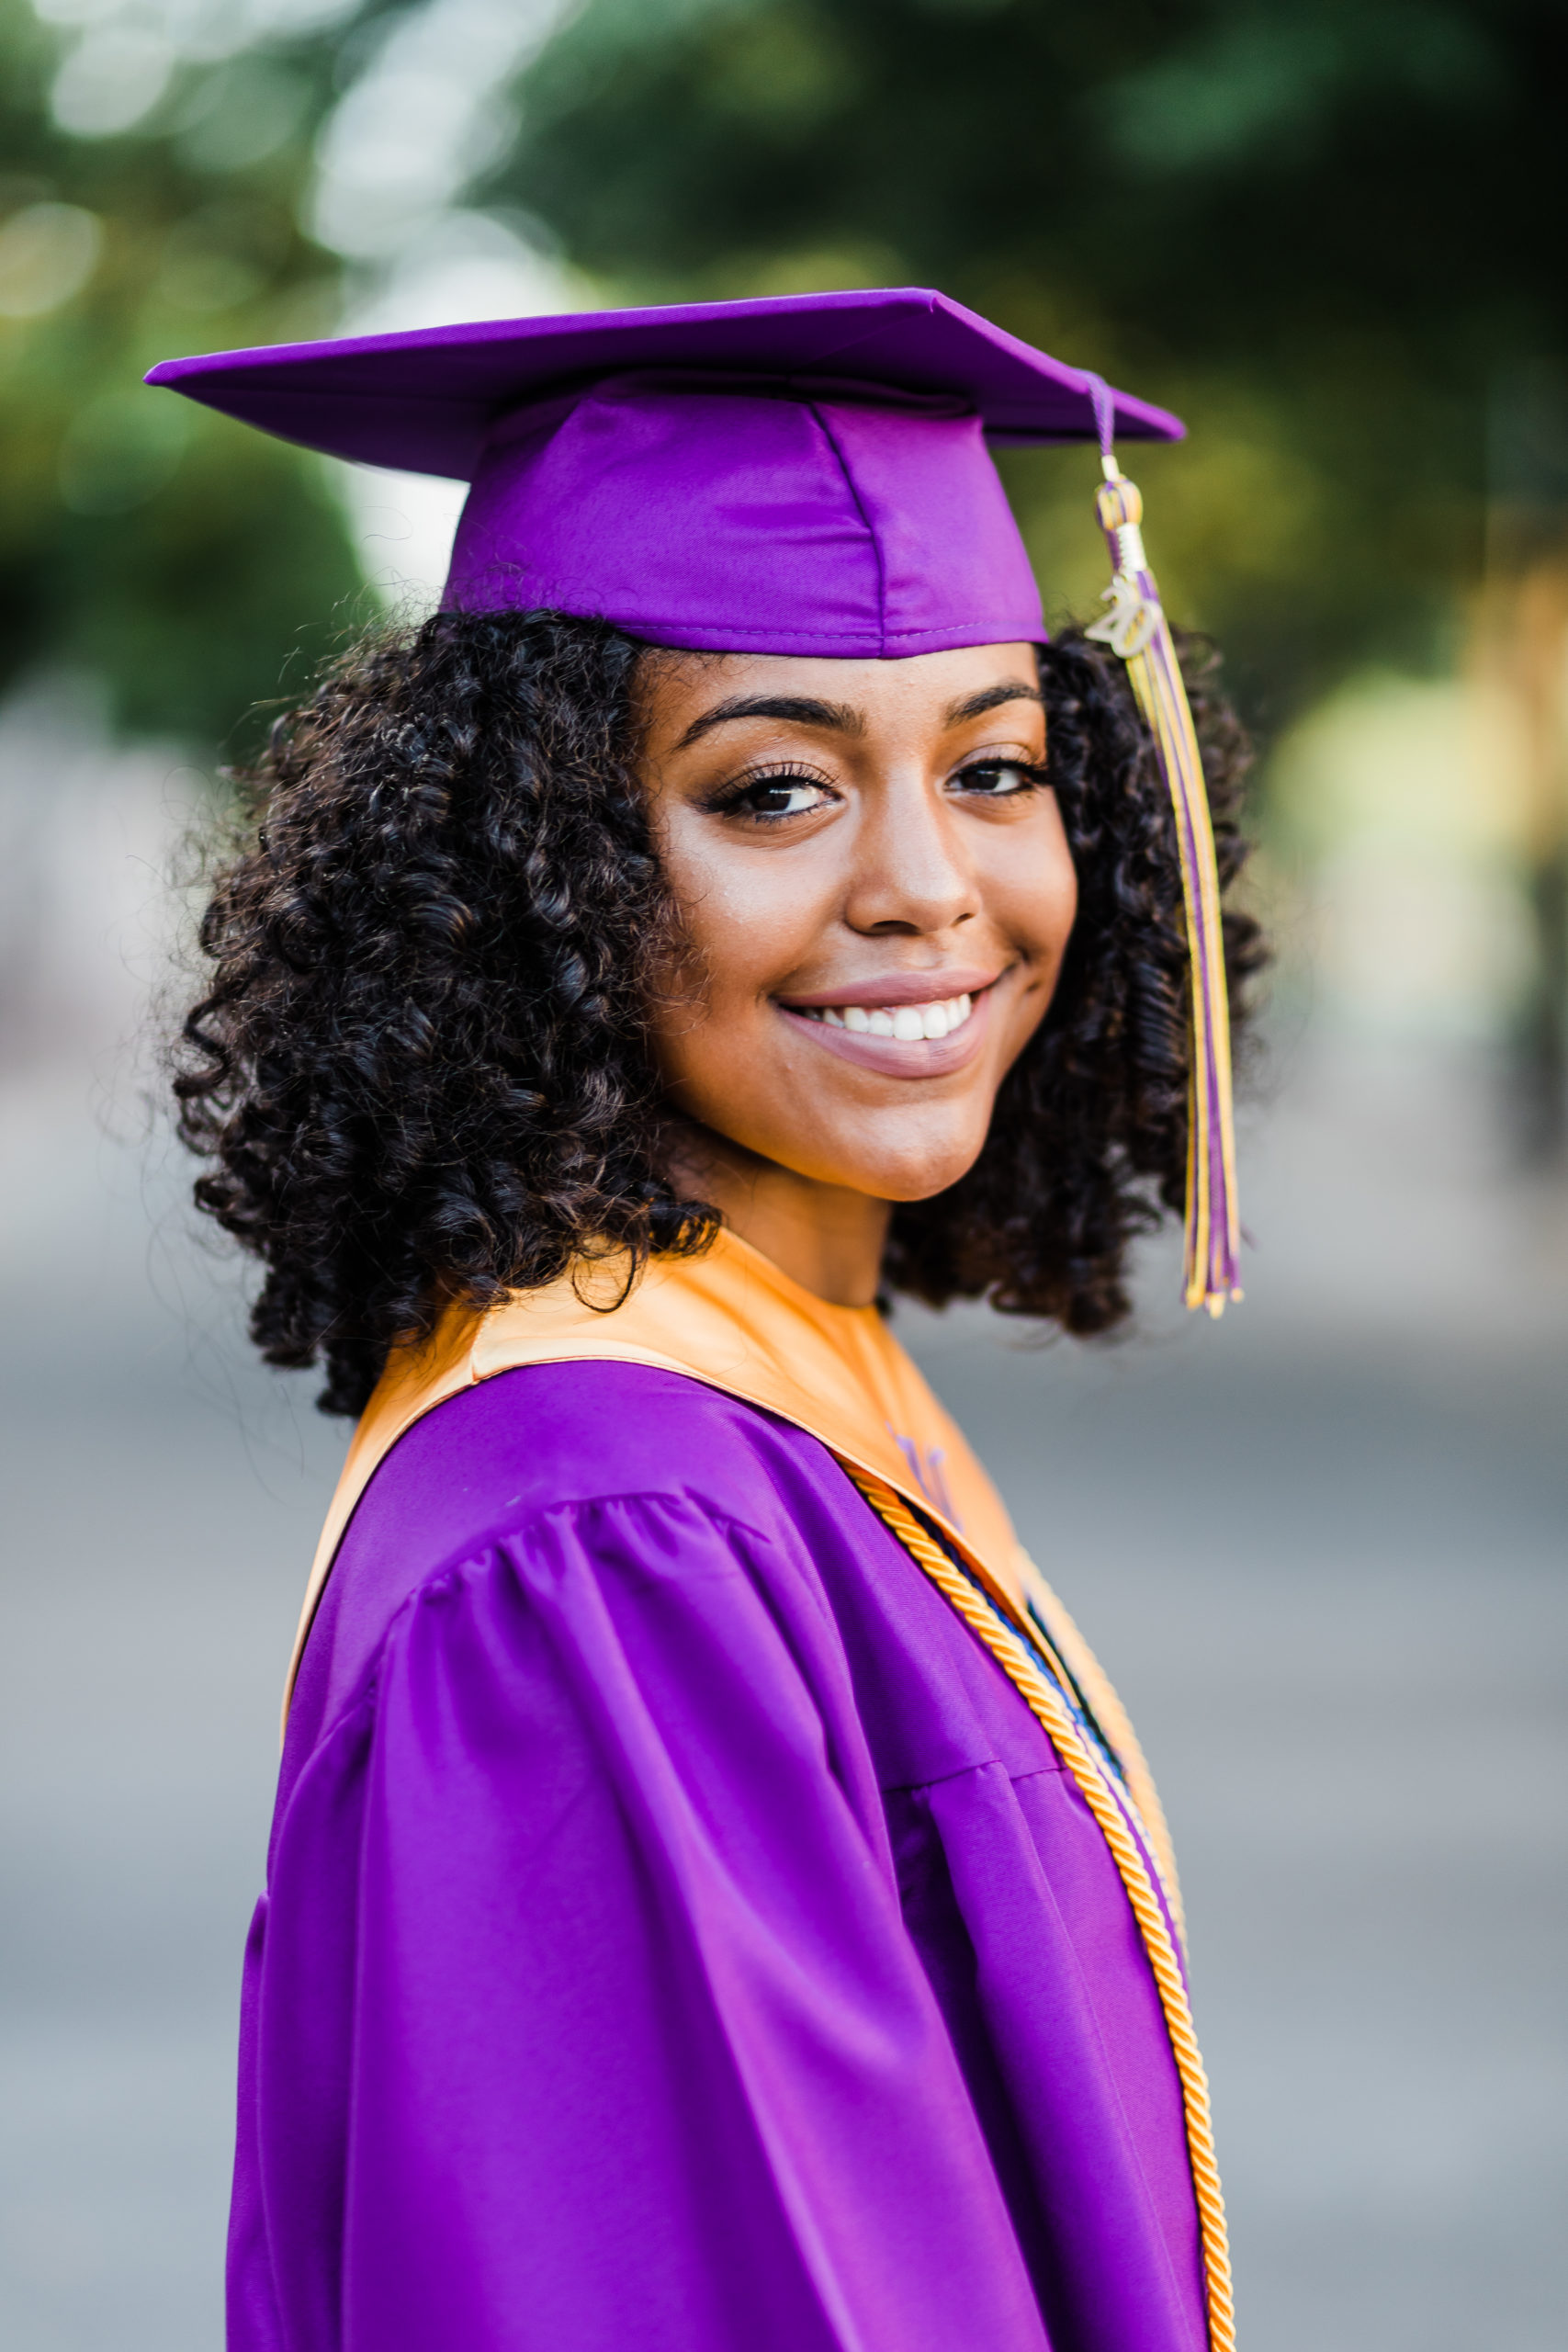 cap and gown picture with girl in prurple smiling over her shoulder